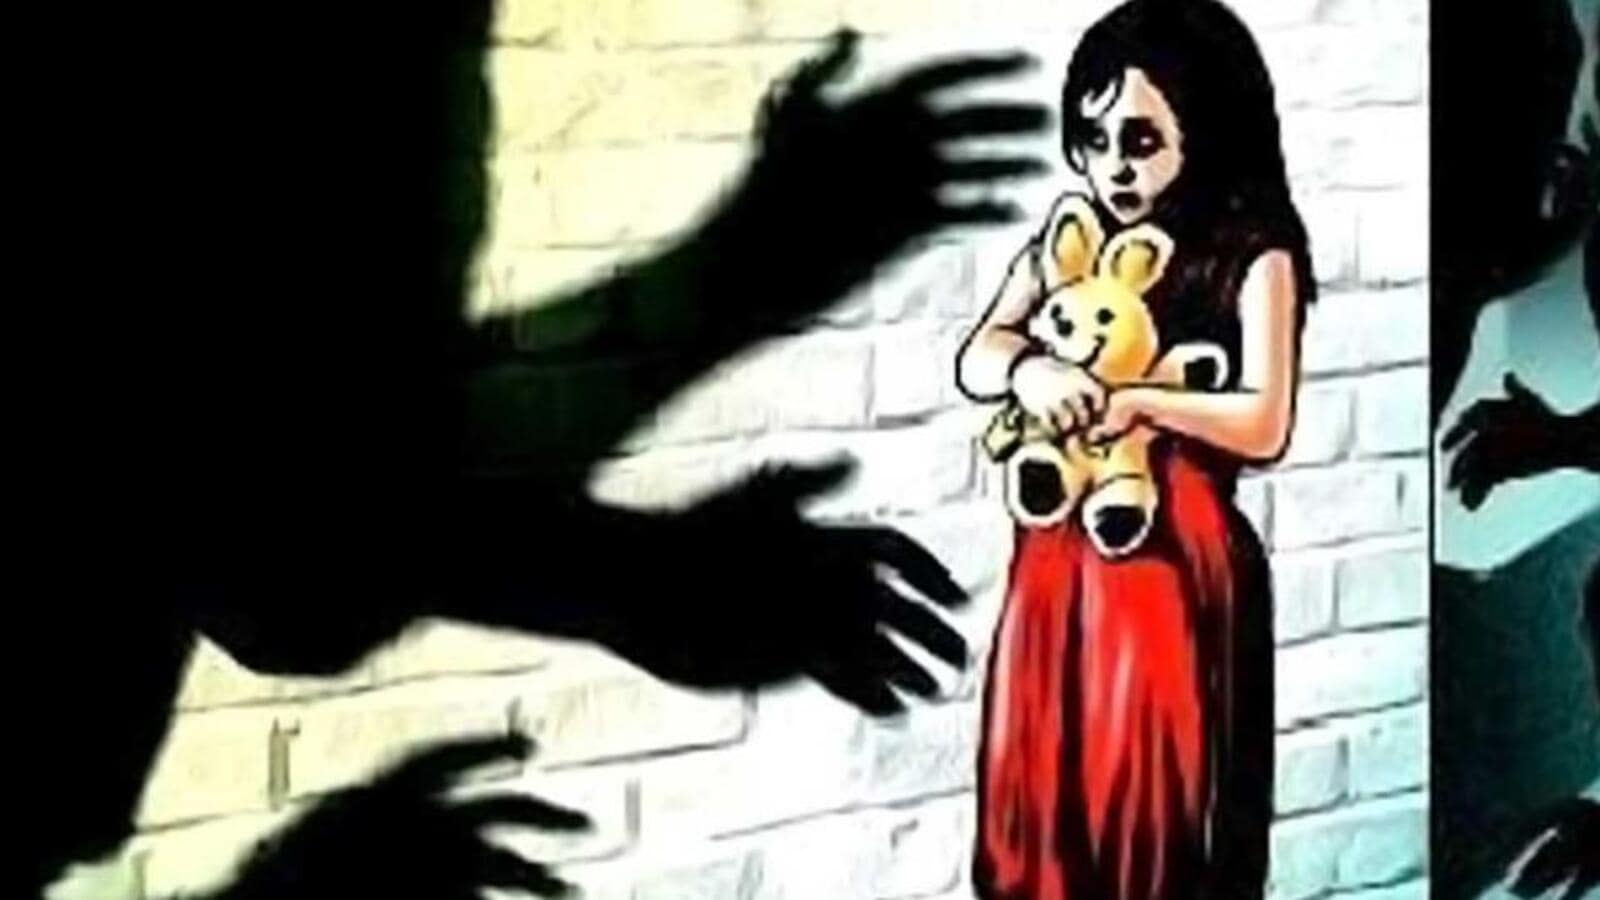 Raping Video S Telugu Kidnap Raping Video S - 8 men rape, film and blackmail 17-year-old Rajasthan girl. Then release  video - Hindustan Times